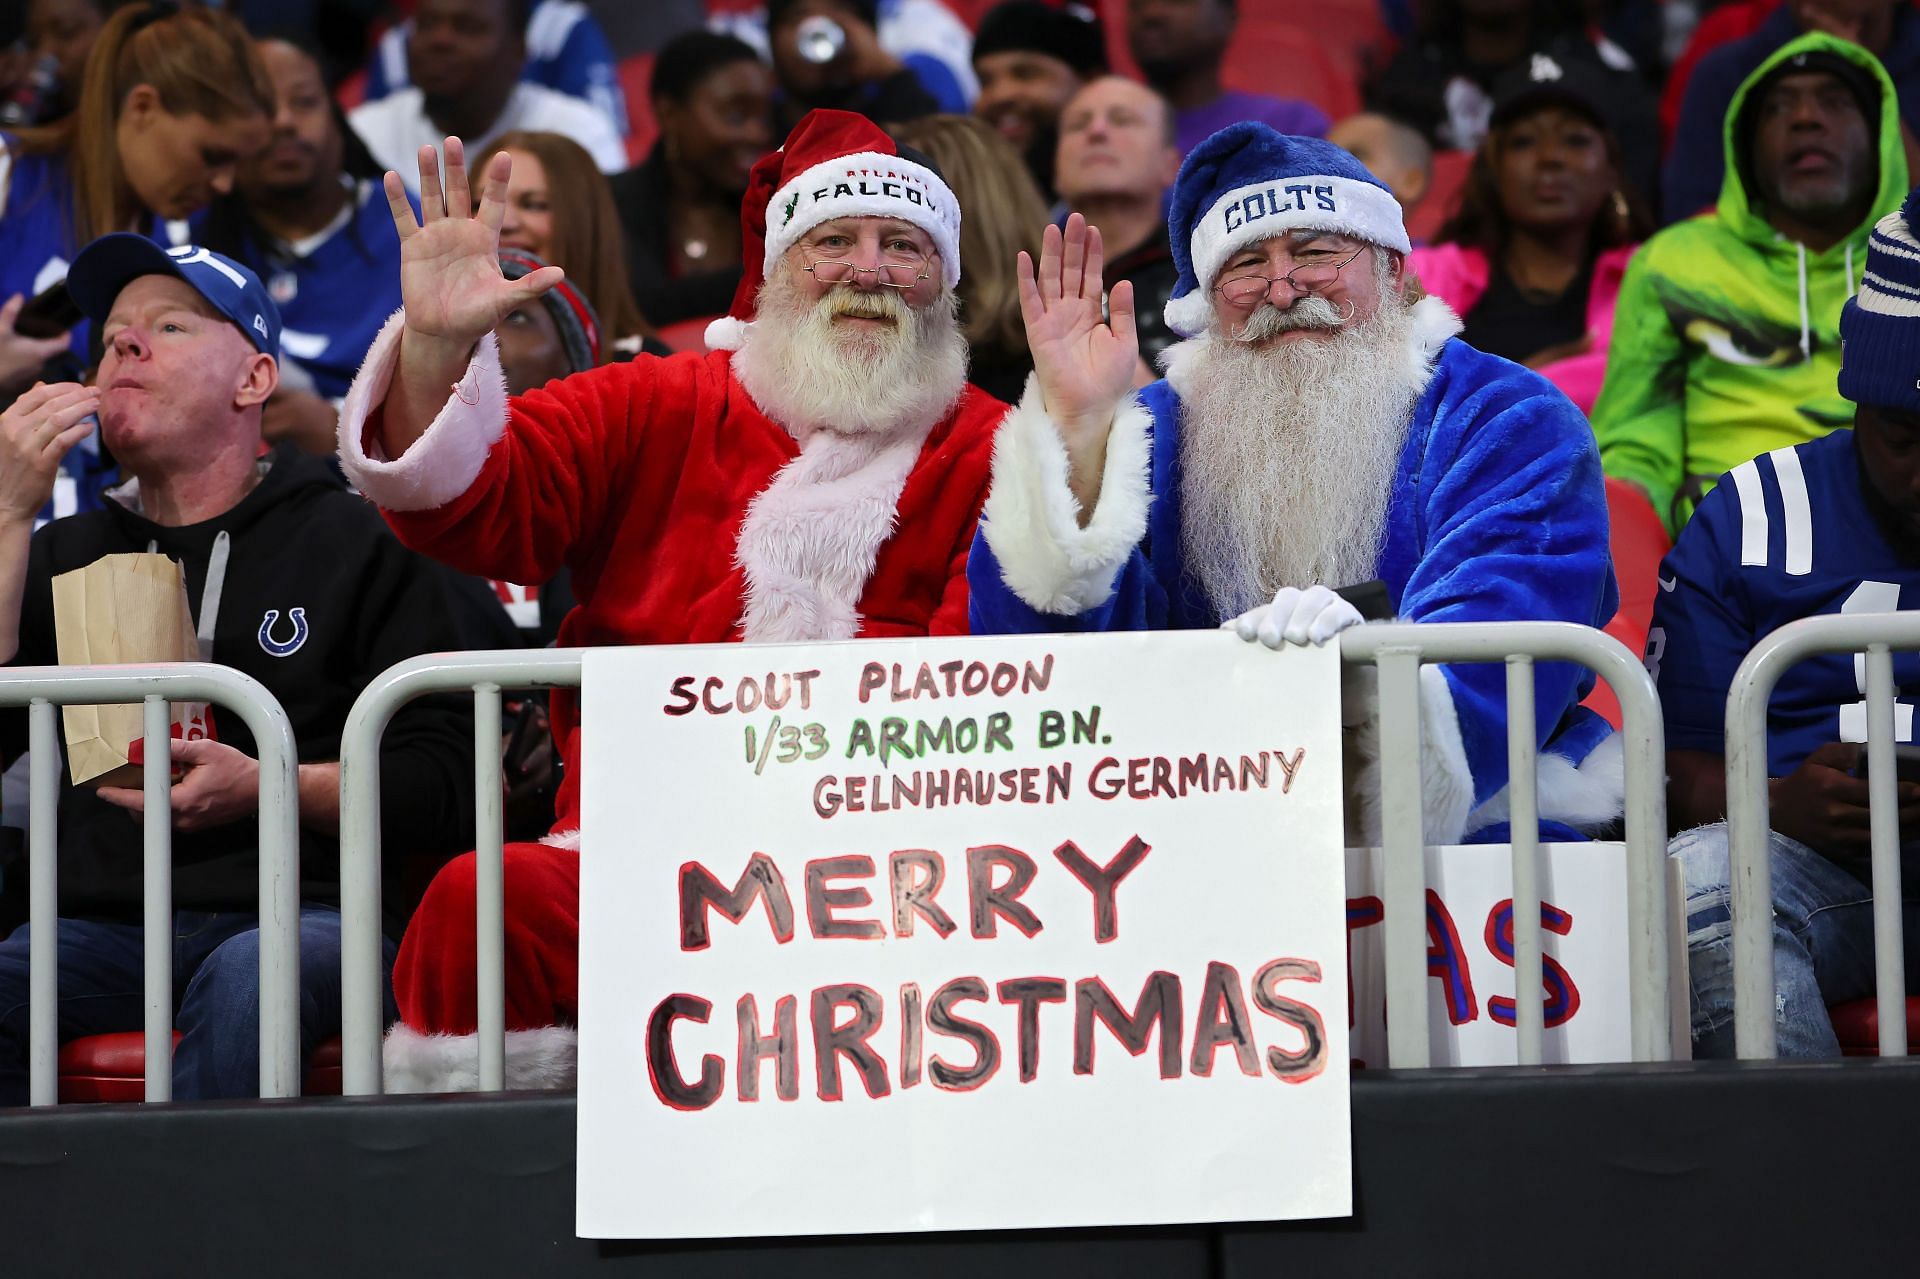 NFL fans on Christmas during Indianapolis Colts vs. Atlanta Falcons